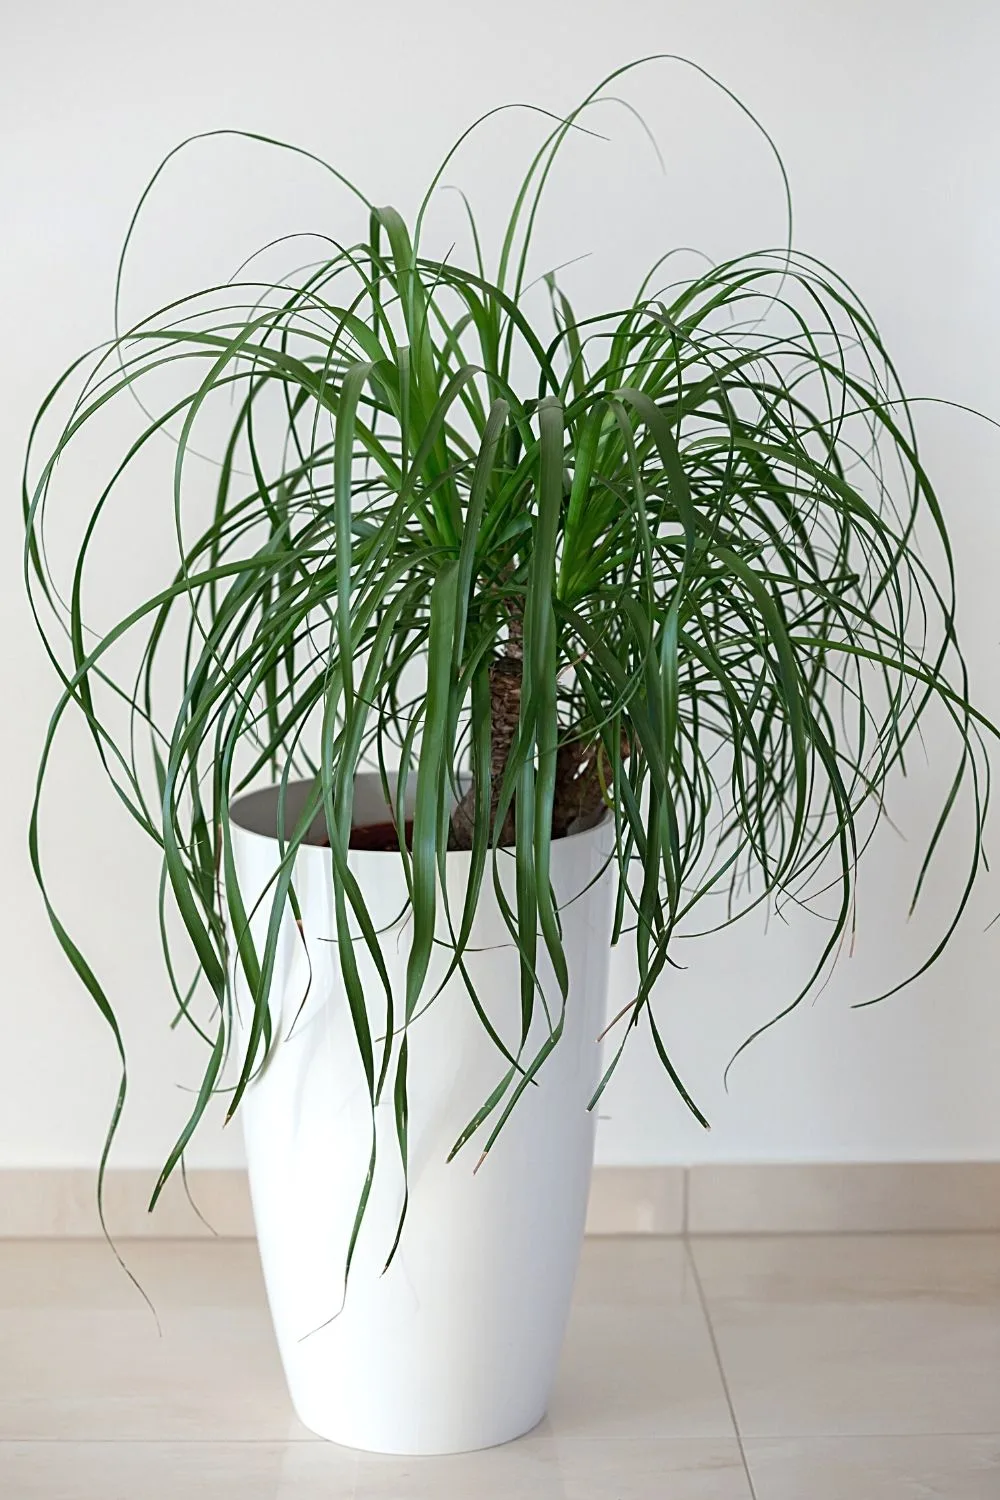 Since it's easy to grow due to its low-maintenance requirements, you can easily make your Ponytail Palm thrive near a southwest-facing window